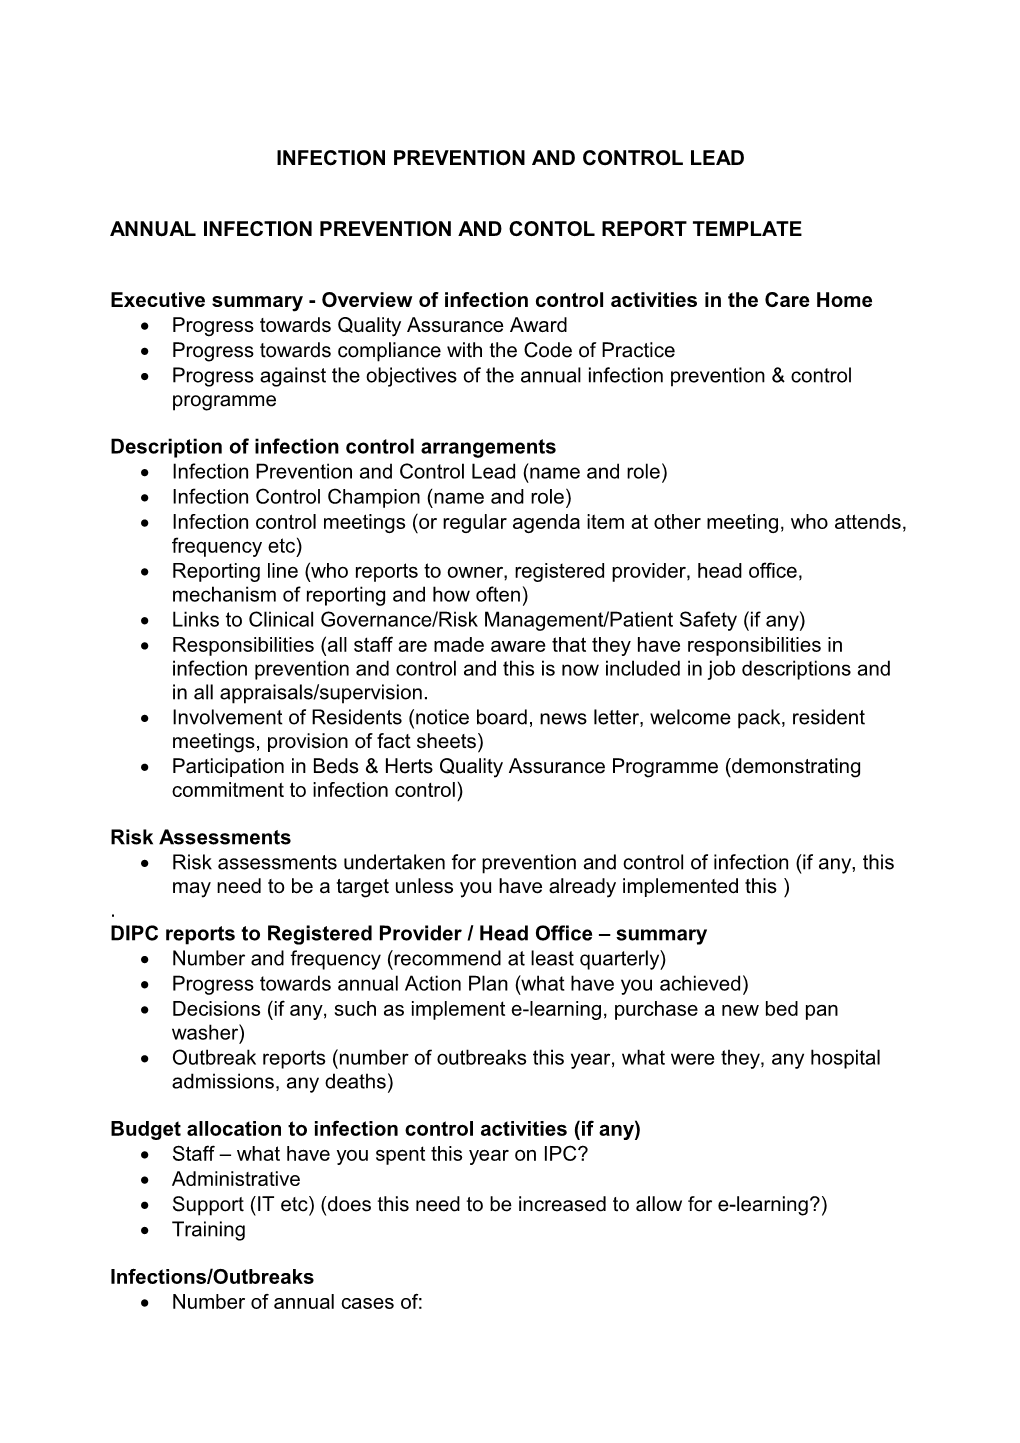 Annual Infection Prevention and Contol Report Template